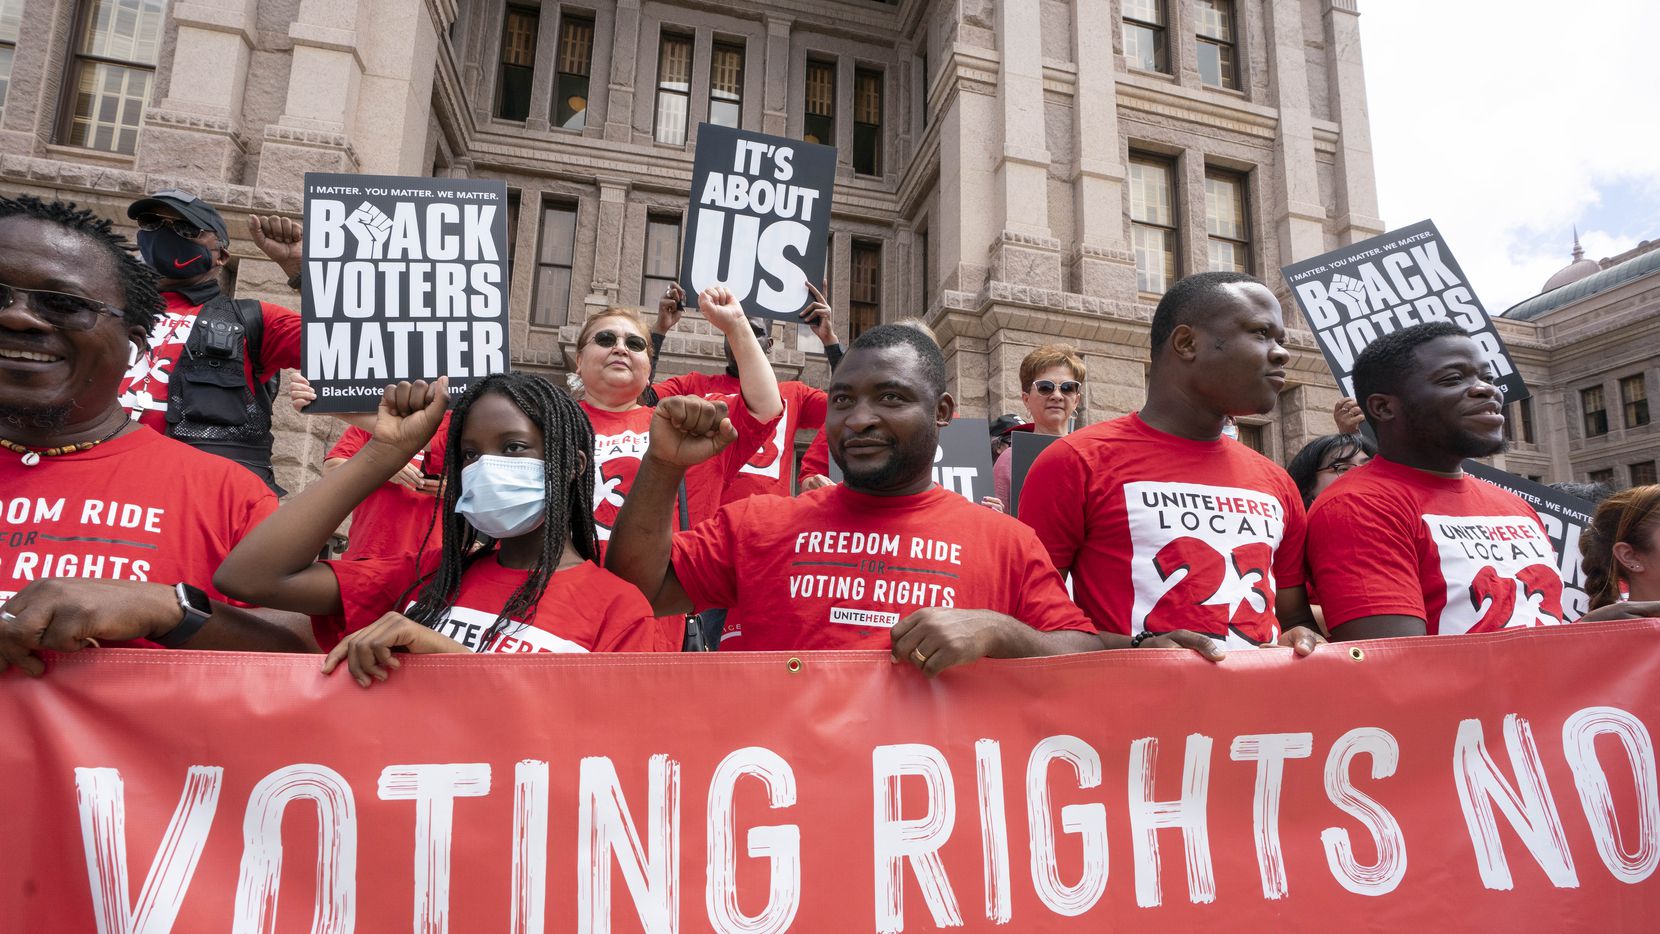 A coalition of voting rights groups including Black Voters Matter and the Texas Right to Vote Coalition rally at the Capitol to decry voter supression bills being advocated by Gov. Greg Abbott.